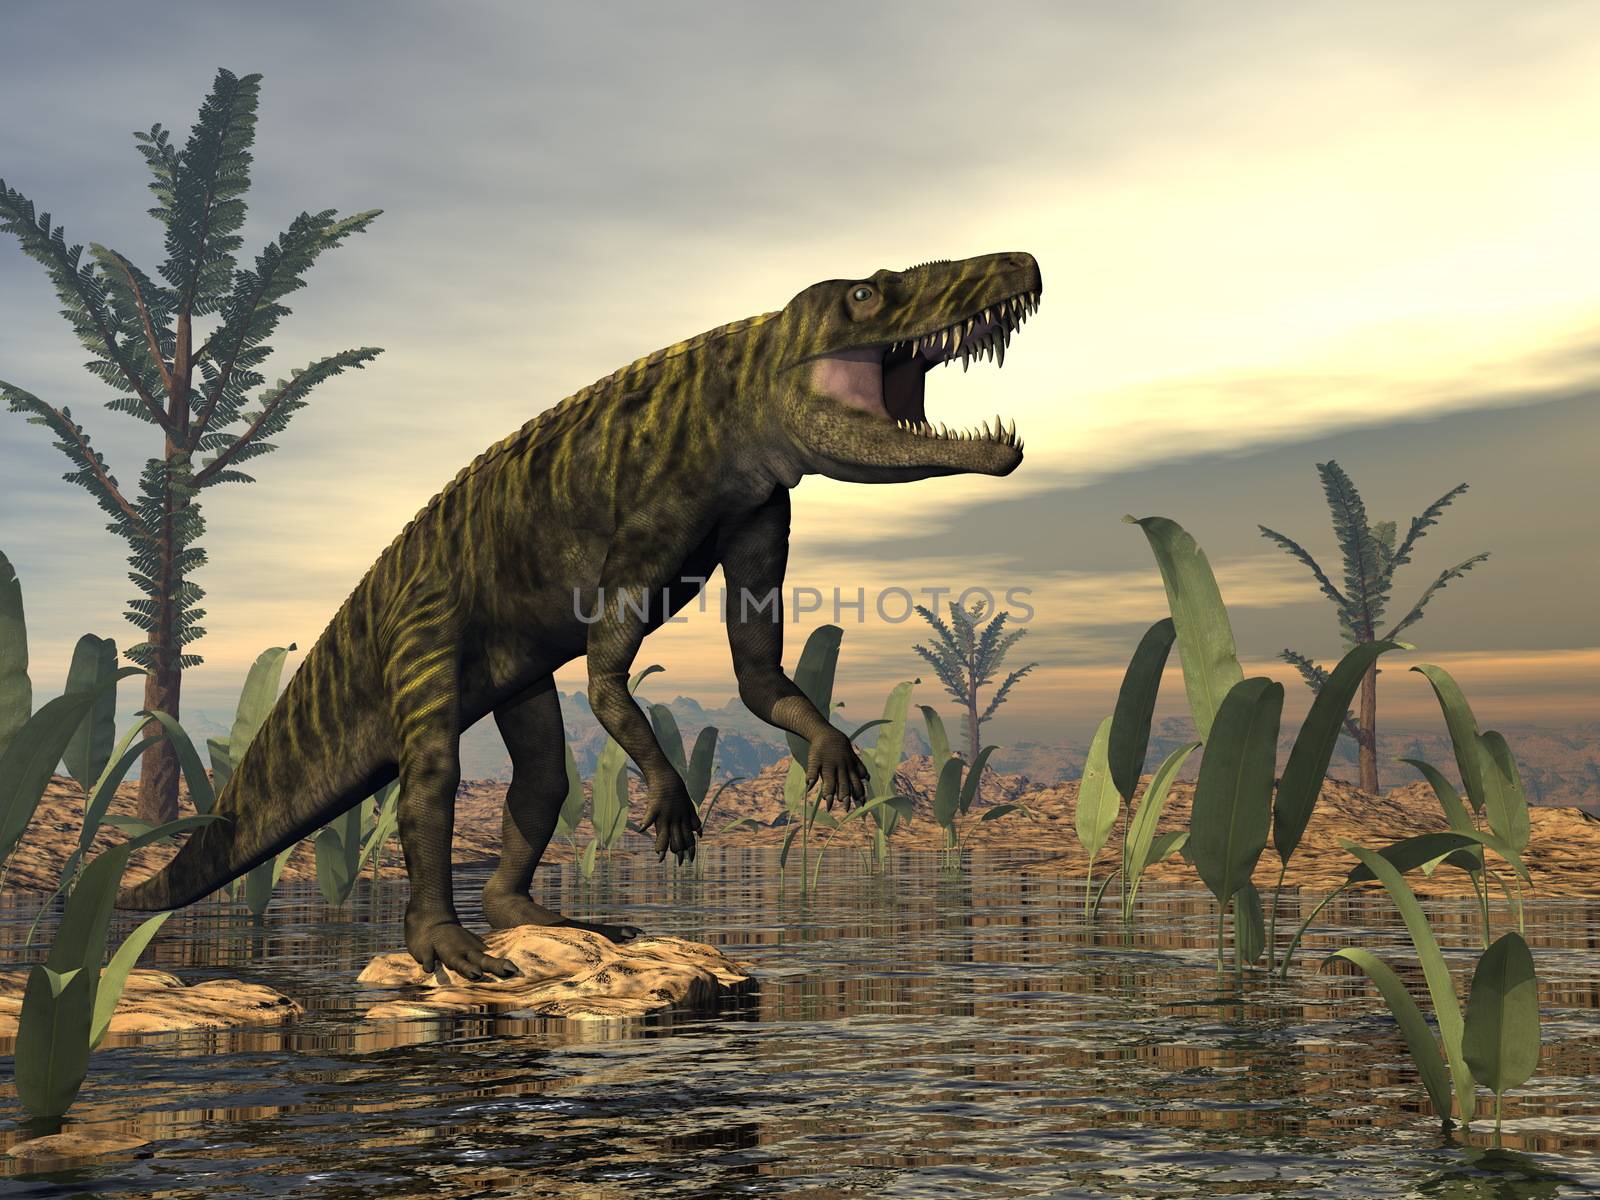 Batrachotomus dinosaur roaring upon a swamp with macrotaeniopteris plants by sunset - 3D render